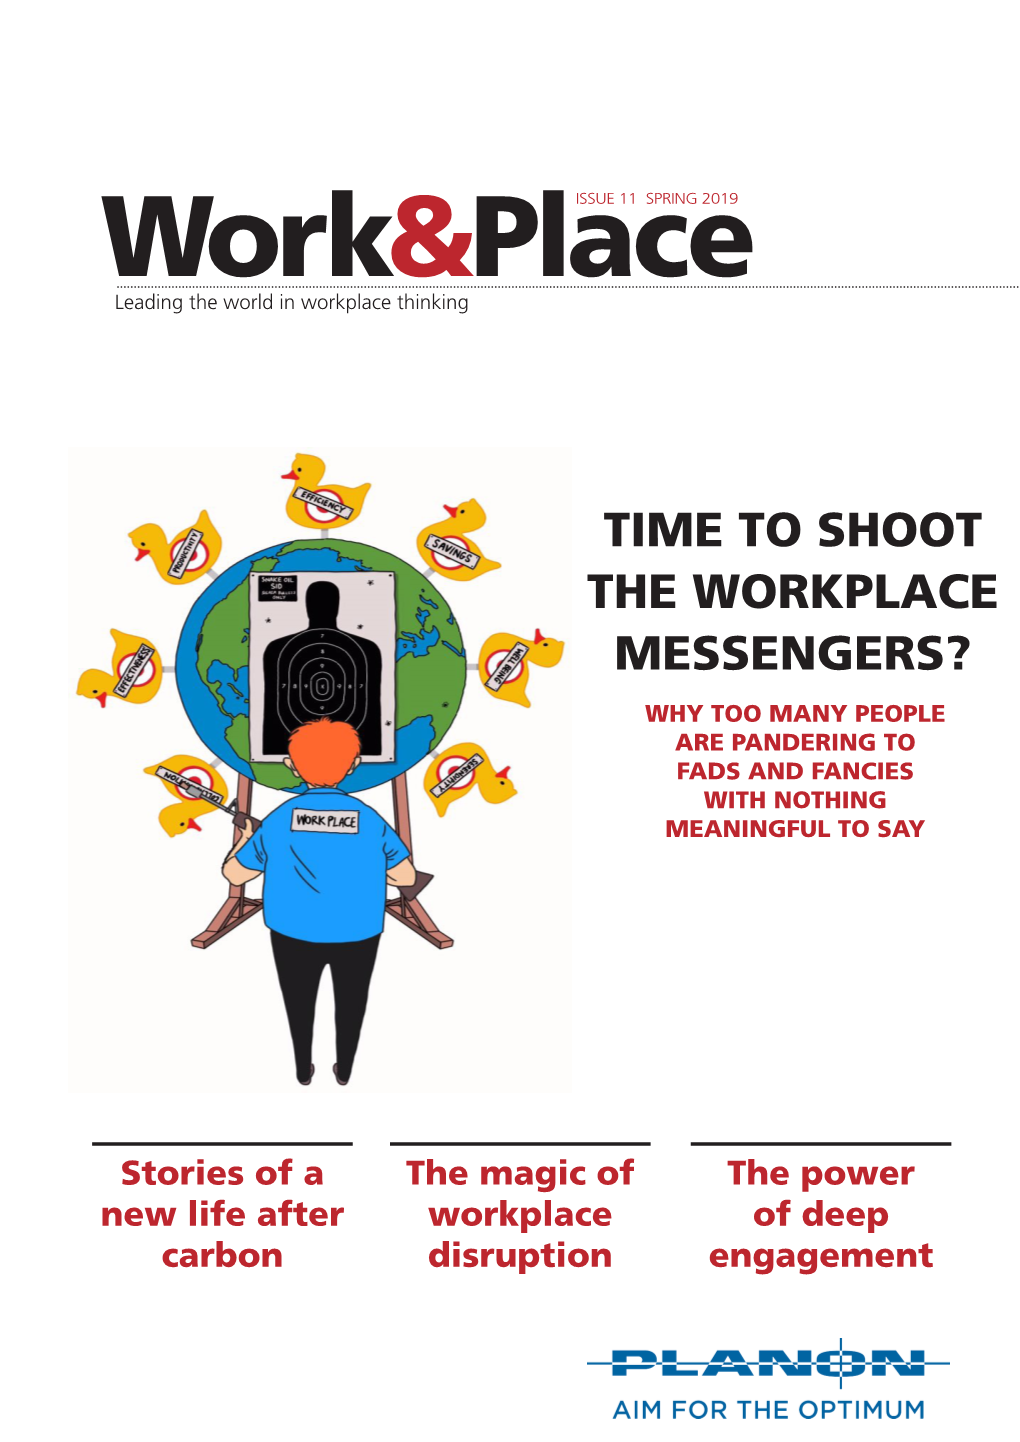 Time to Shoot the Workplace Messengers? Why Too Many People Are Pandering to Fads and Fancies with Nothing Meaningful to Say